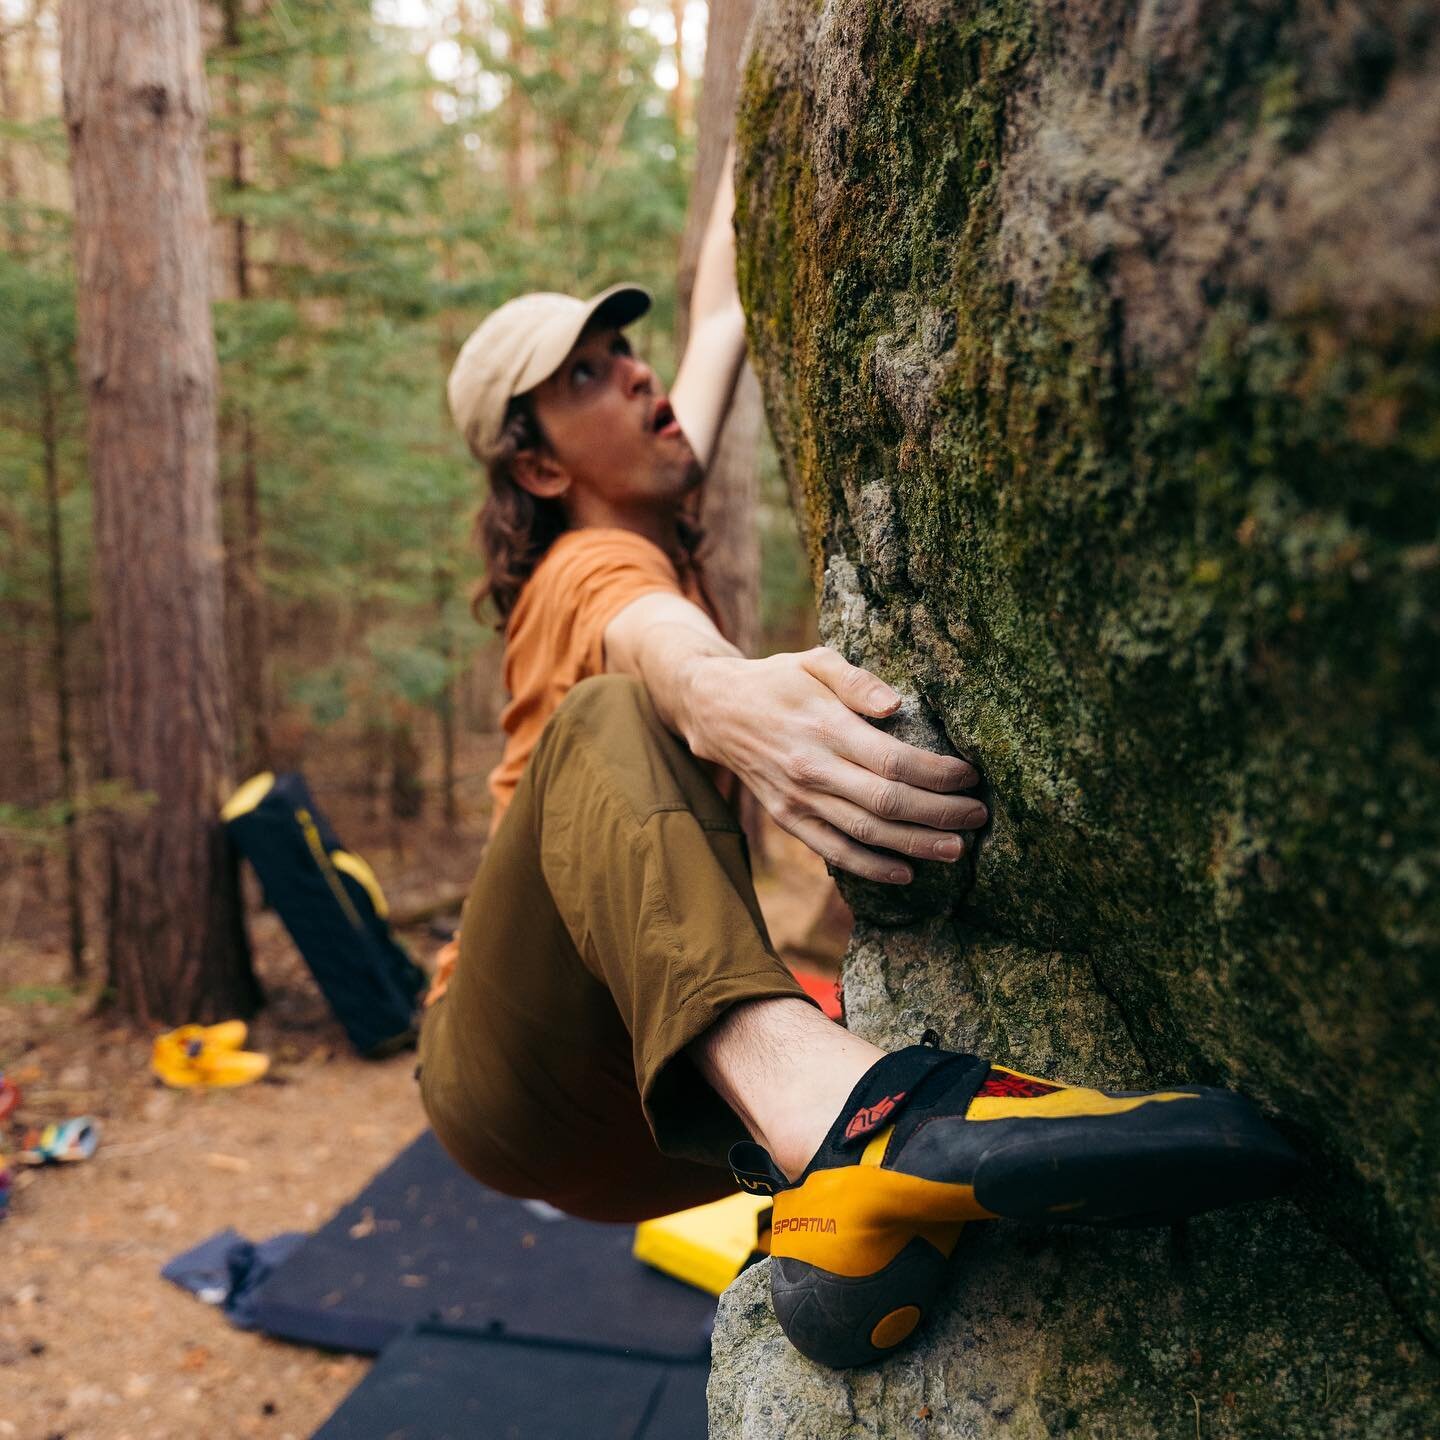 Some pics of friends and slow living and climbing this spring&hellip;swipe to the end for a spicy surprise and some juicy man butts

#climbing #bouldering #adirondacks #optoutside #upstateny #exploremore #rocks